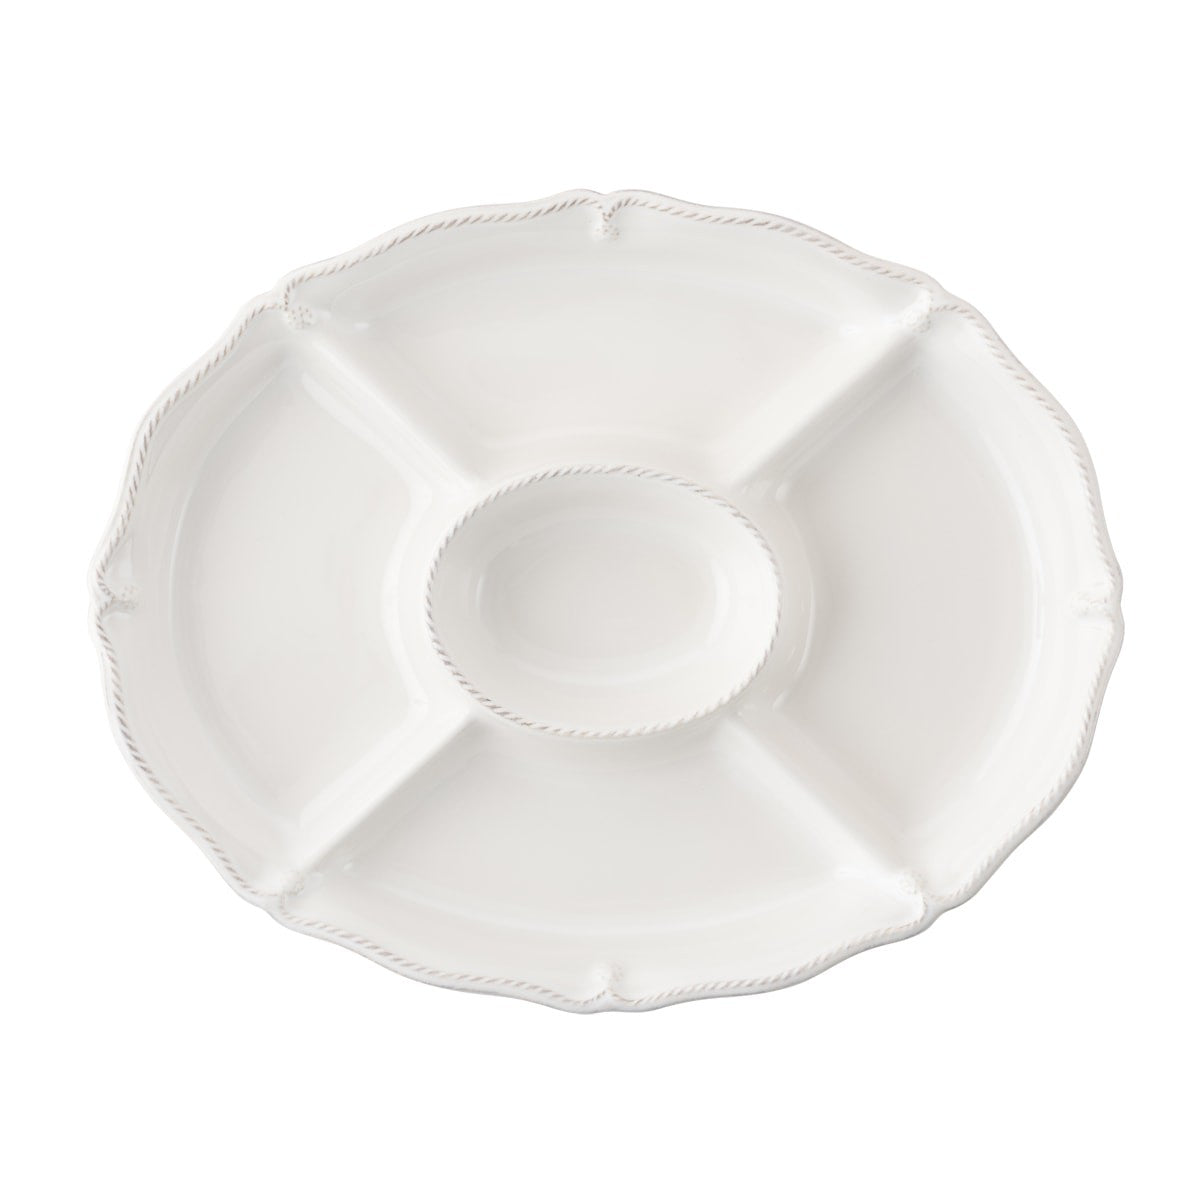 top view of the berry and thread crudite platter on a white background